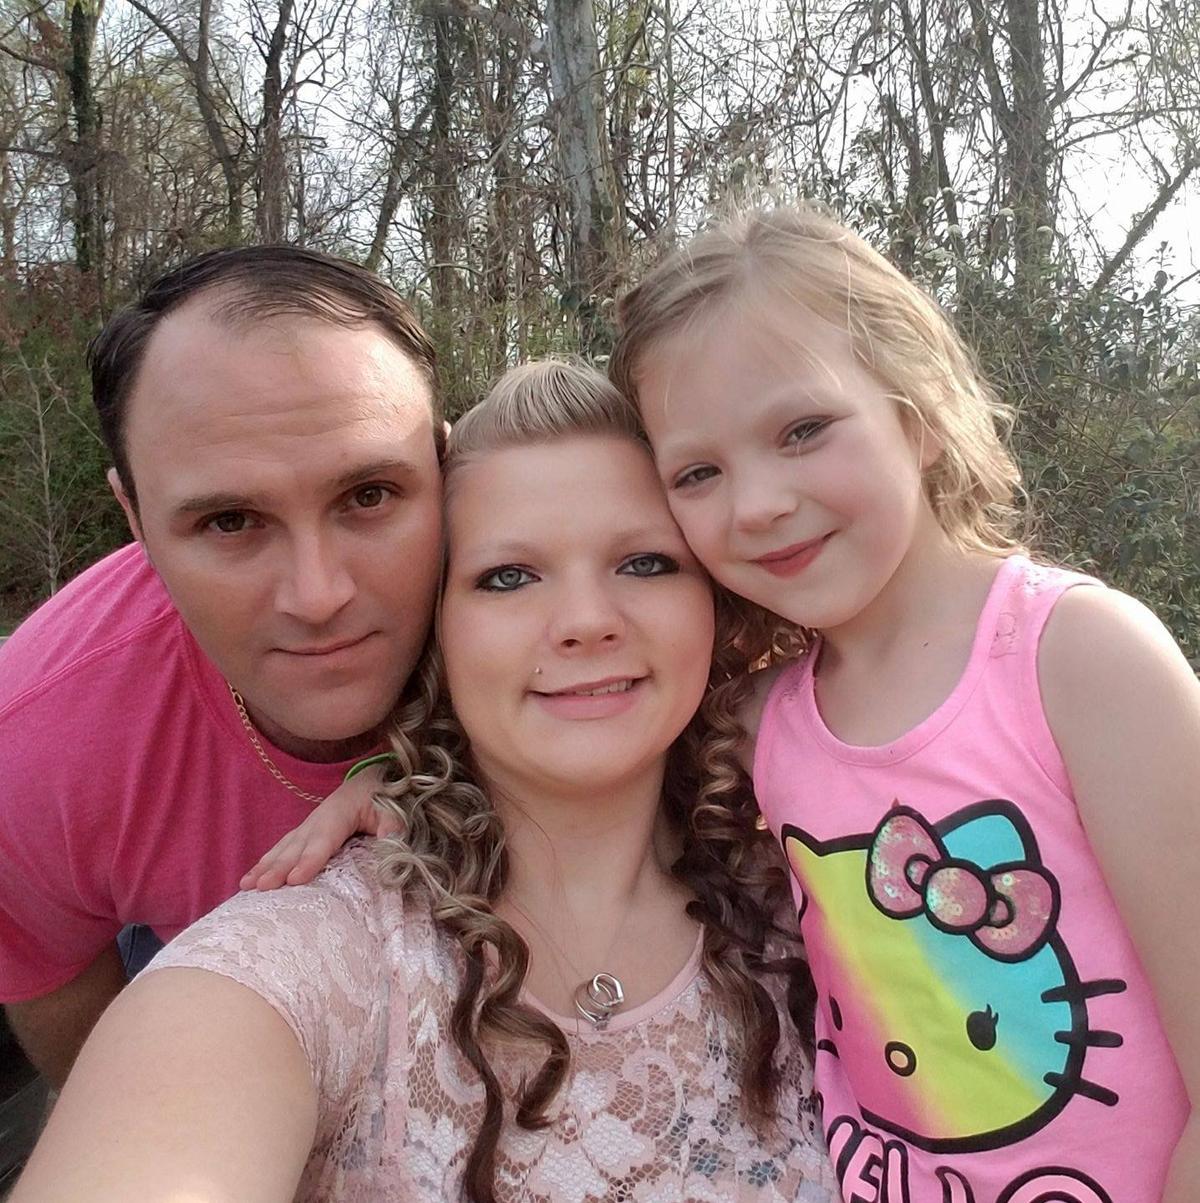 Kaylei with her mom, Whitney, and dad, Jason (Courtesy of <a href="https://www.facebook.com/whitney.brown.18400">Whitney Barton</a>)